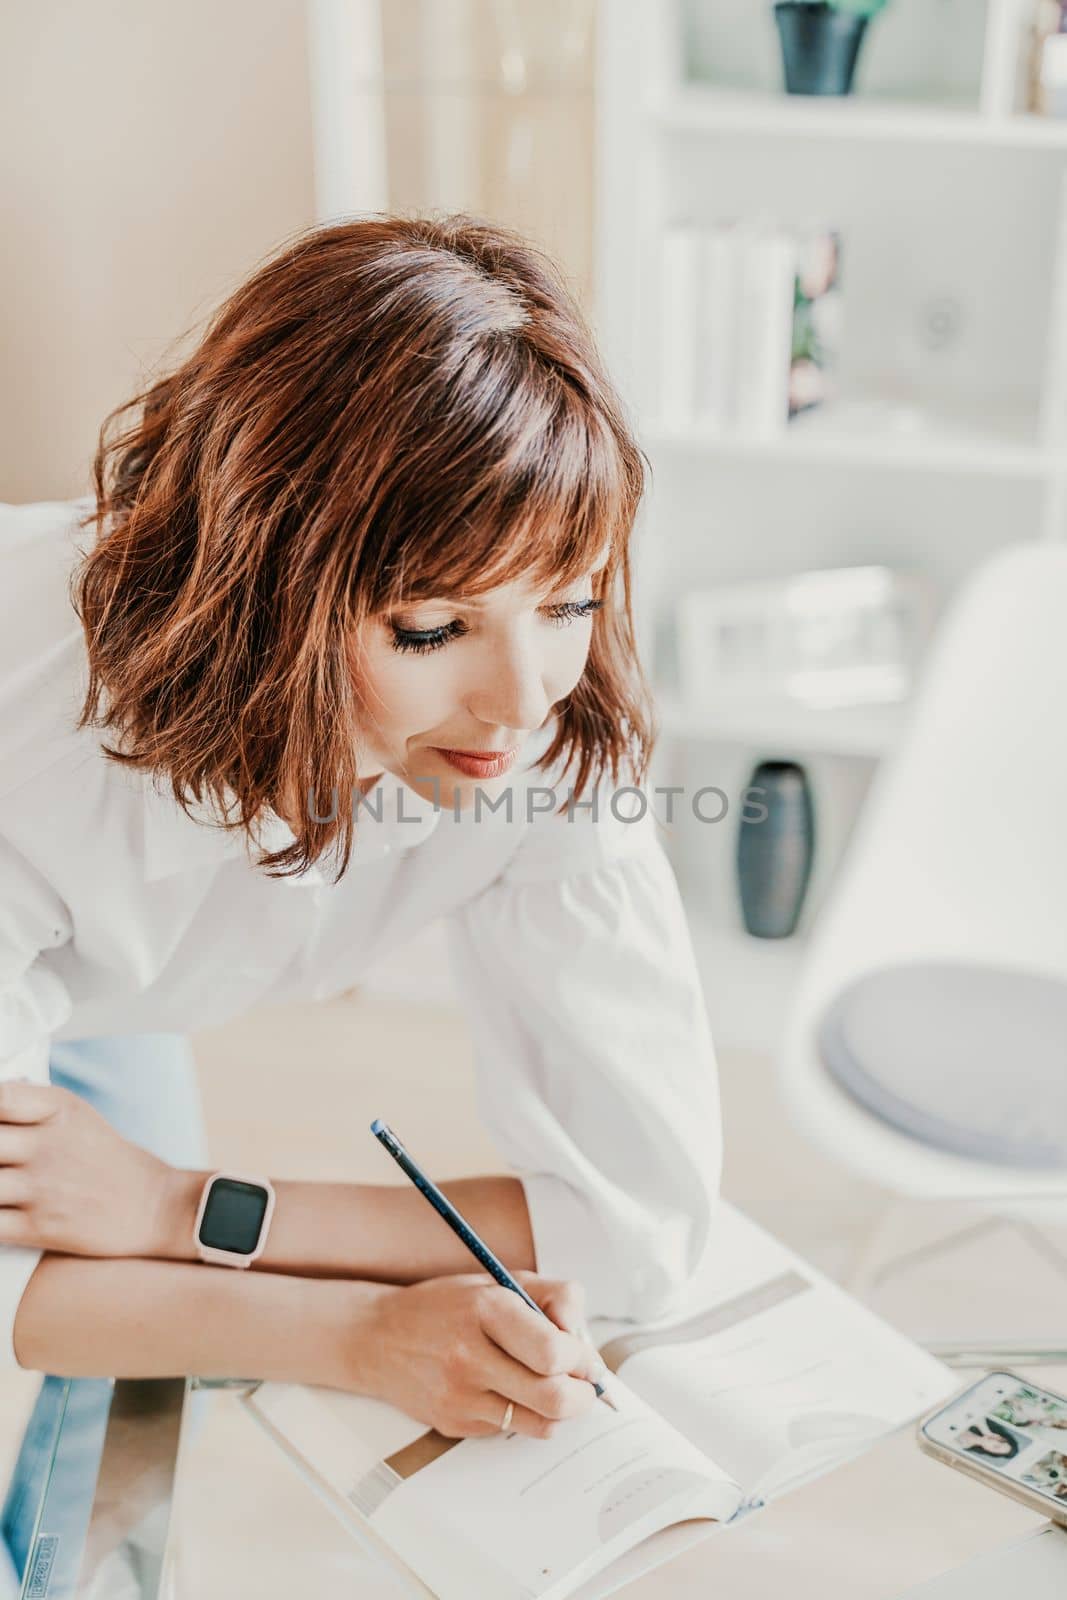 Business woman in bright office. A woman writes in a notebook while standing near the workplace desk. A business woman working at a desk in an office is dressed in jeans and a white shirt. by Matiunina